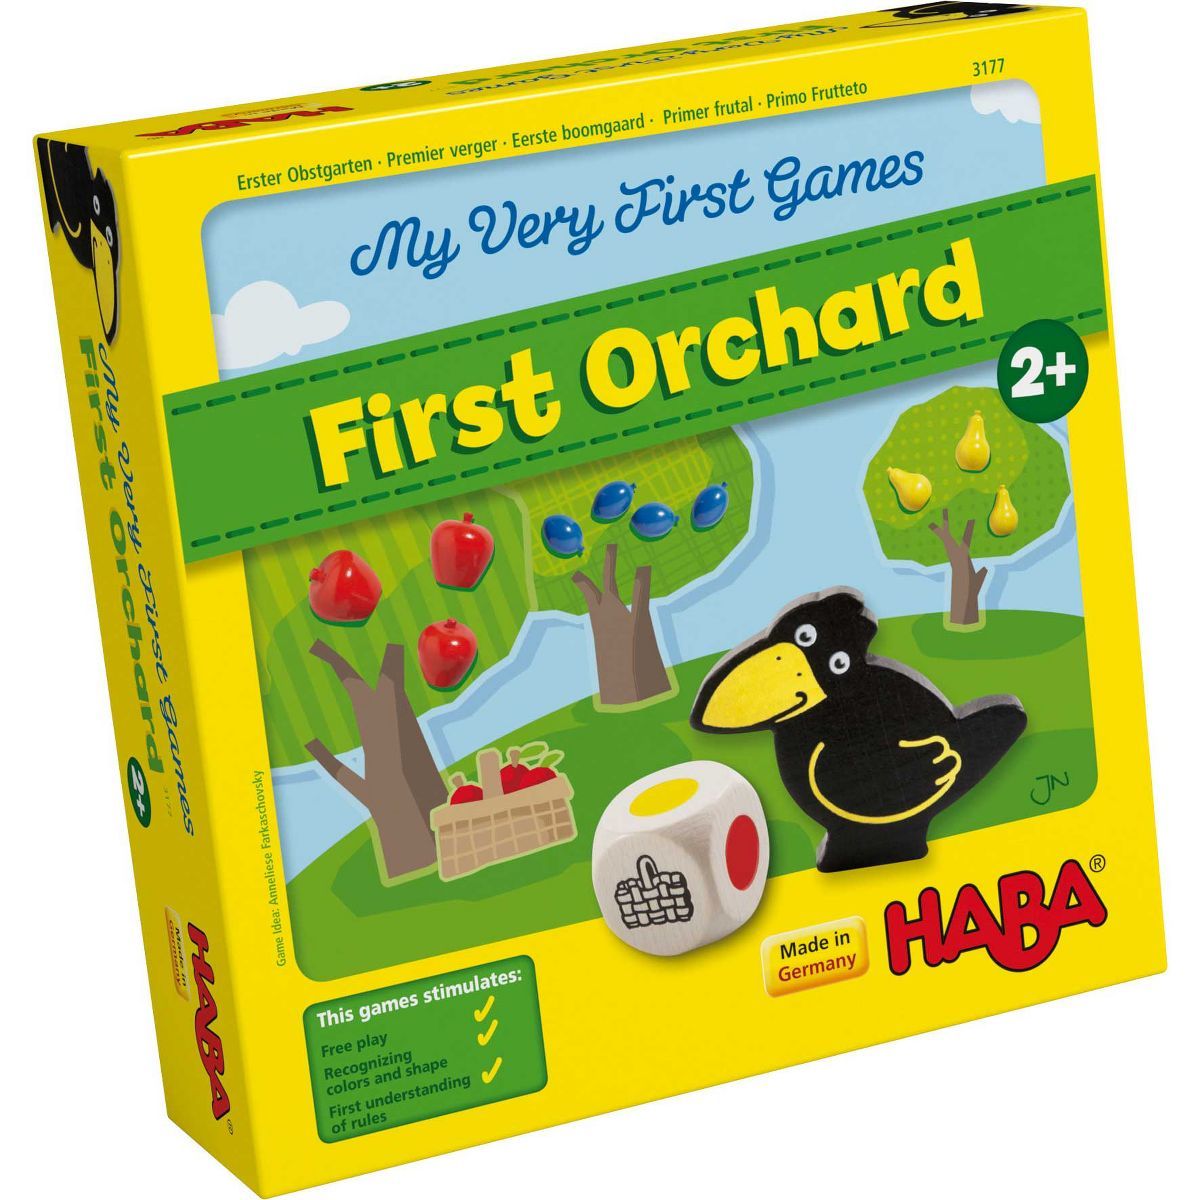 HABA My Very First Games - First Orchard Cooperative Board Game (Made in Germany) | Target